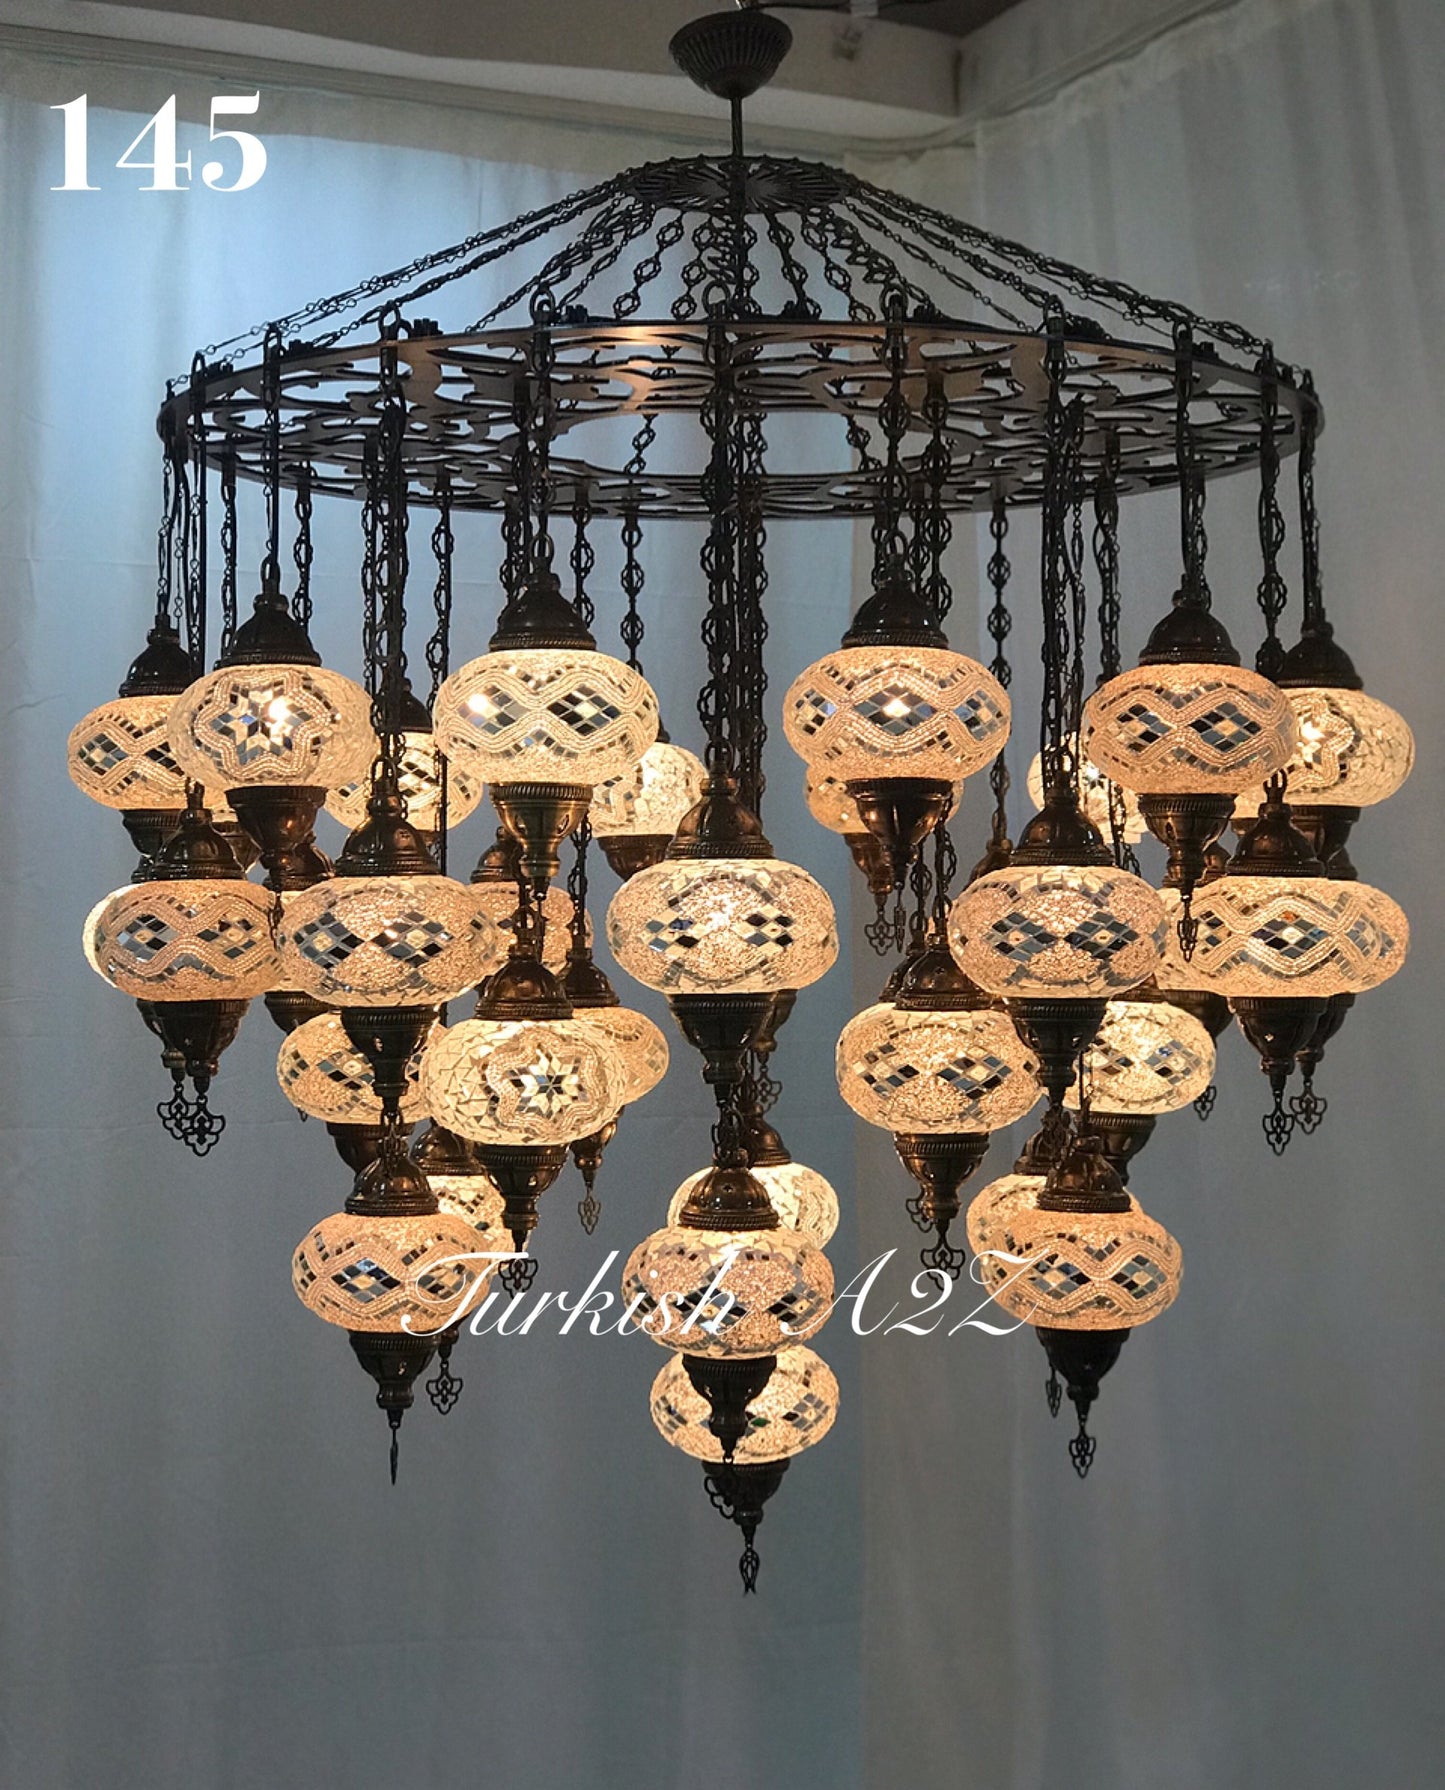 Turkish Mosaic Chandelier With 37 Large Globes  ,ID: 145, FREE SHIPPING